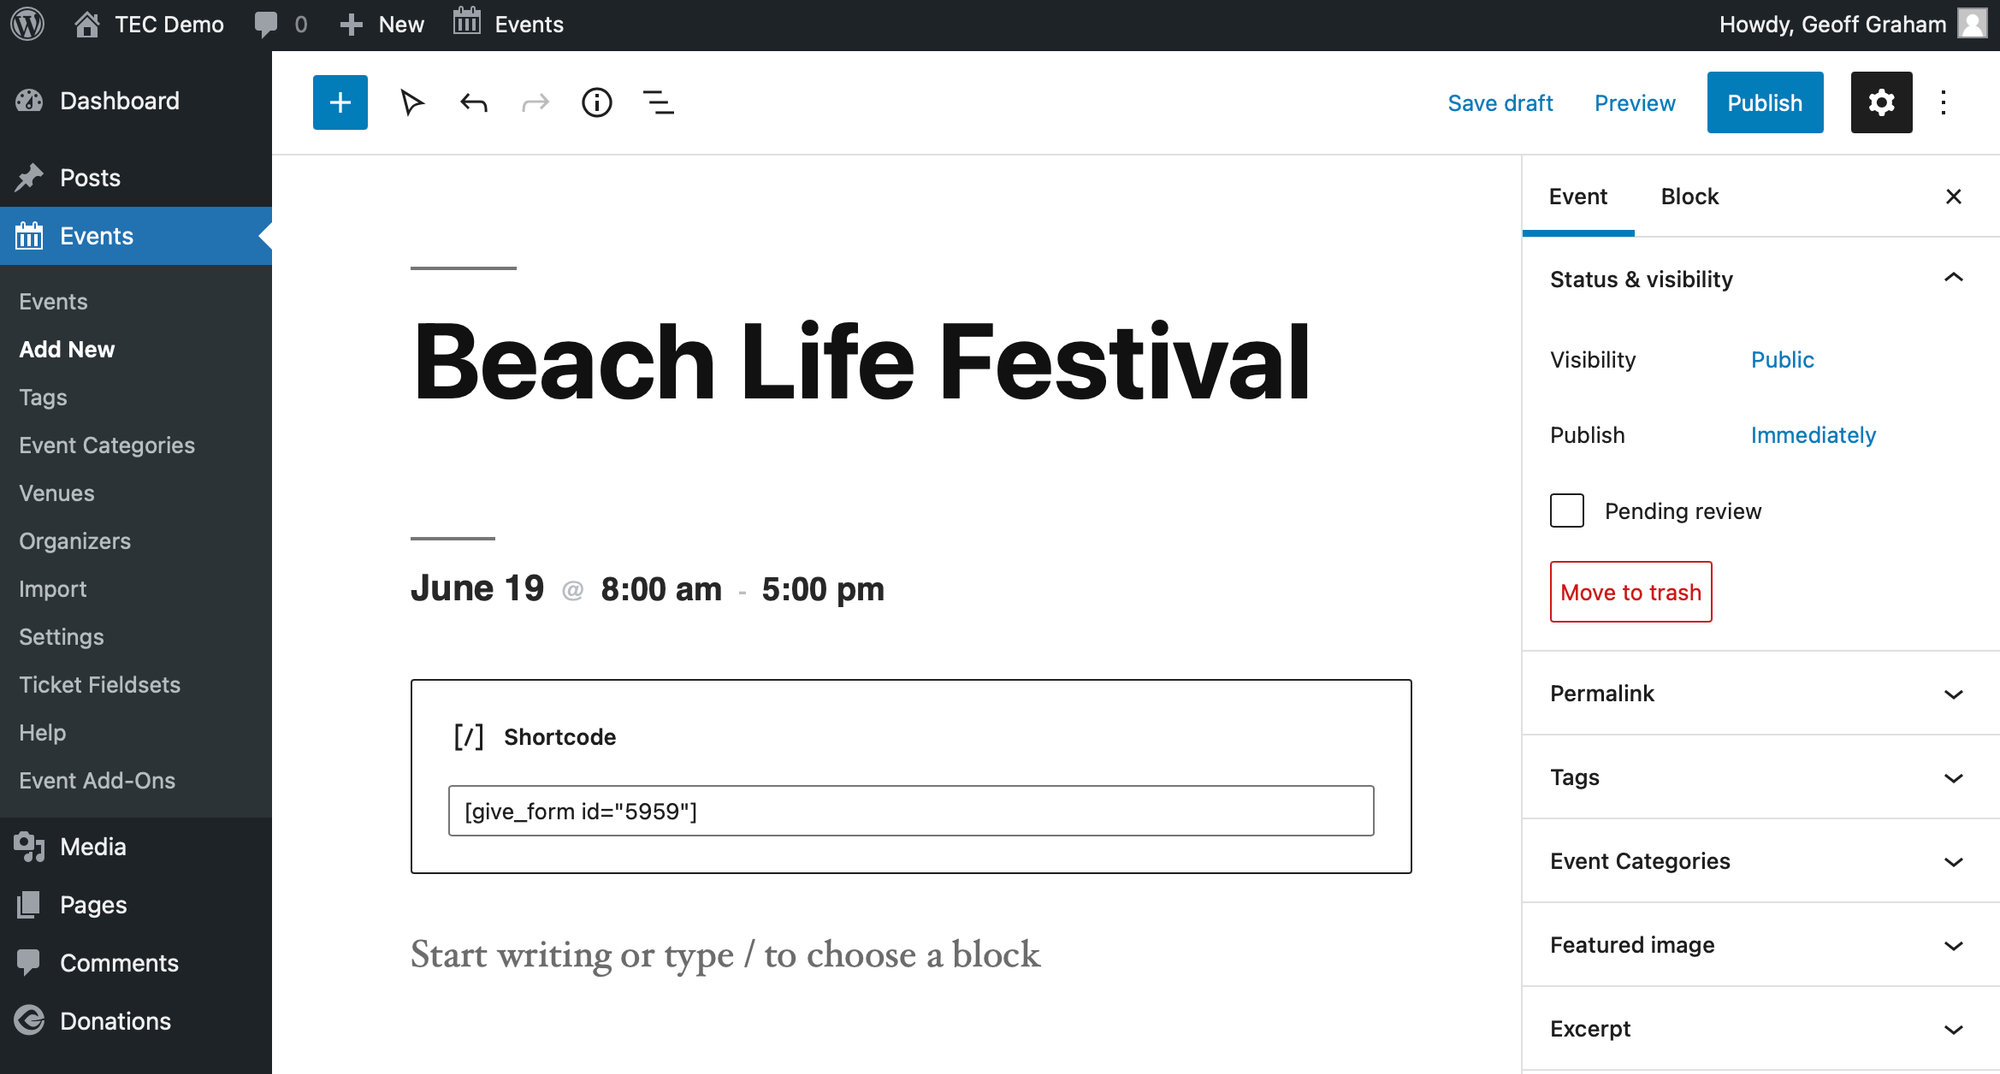 Showing the WordPress Block Editor for an event post. The event is called Beach Life Festival and there is a Shortcode block embedded in the content that includes the GiveWP shortcode containing the donation form ID.